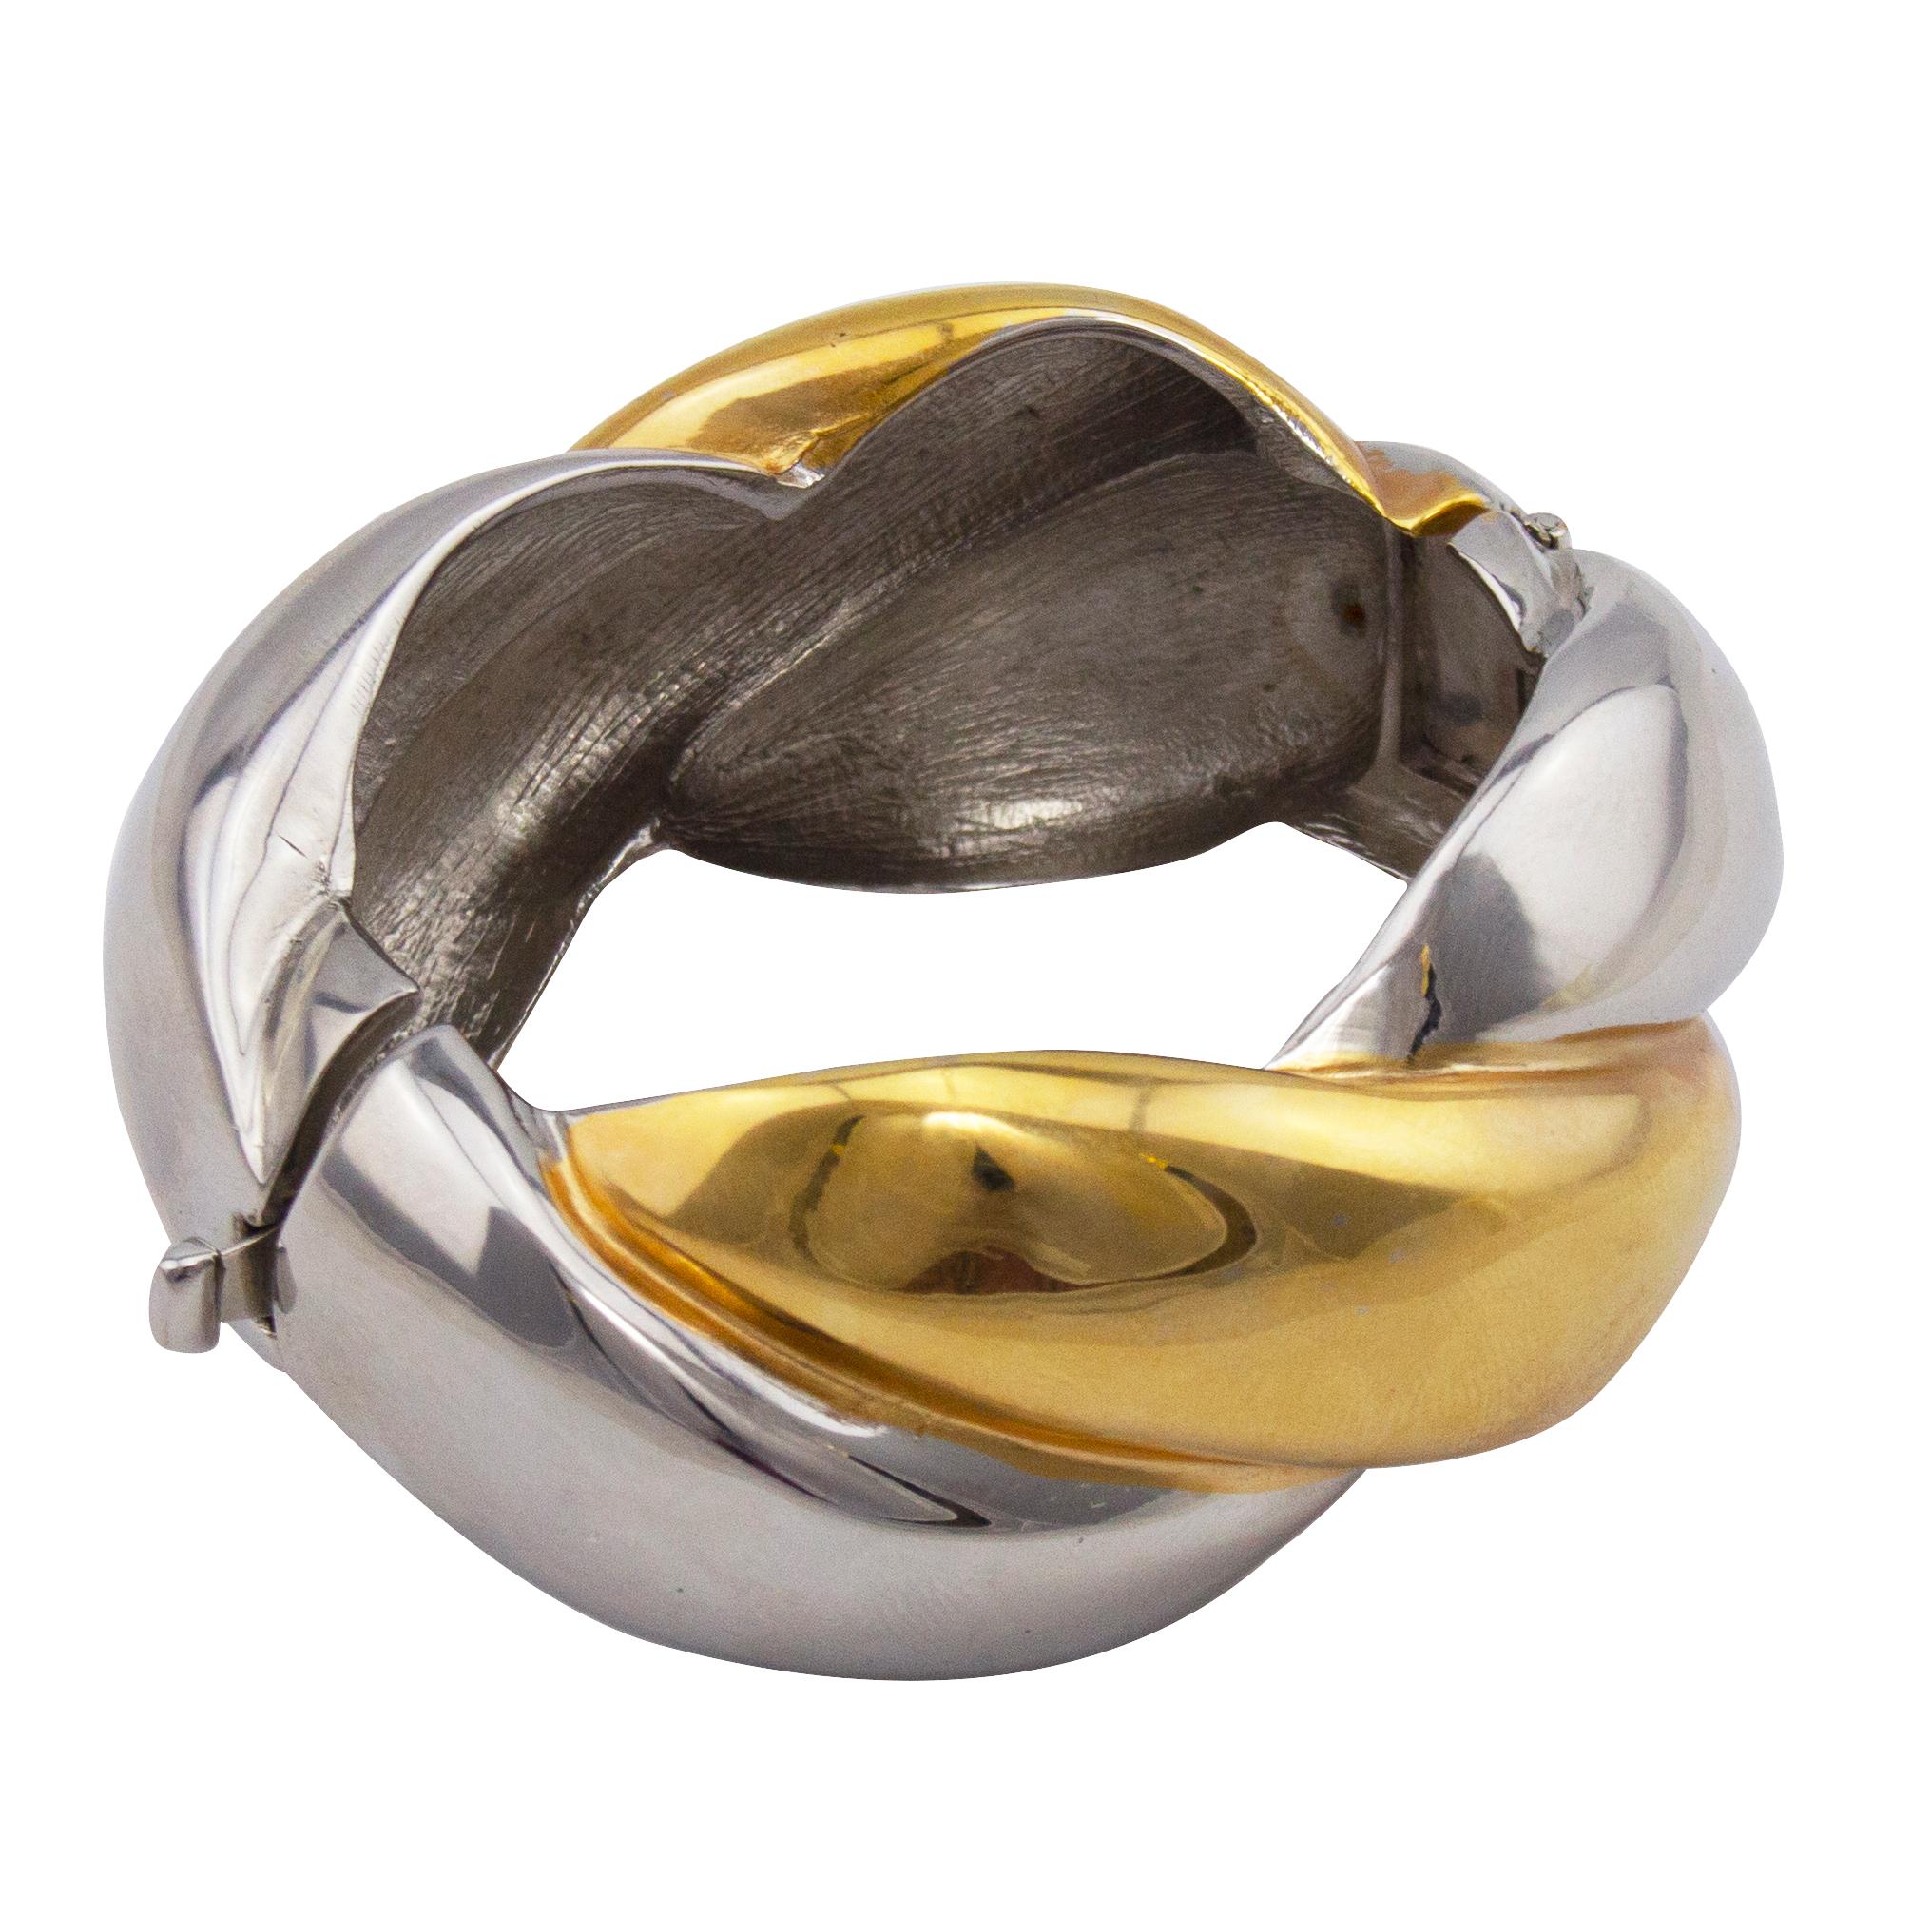 Absolutely fabulous and fun Kenneth Jay Lane bangle from the 1980s. A lovely mix of warm bright gold and cool silver tone metal braided together. Oval shaped with the opening on one side and the hinges on the other. Interior markings. A great piece